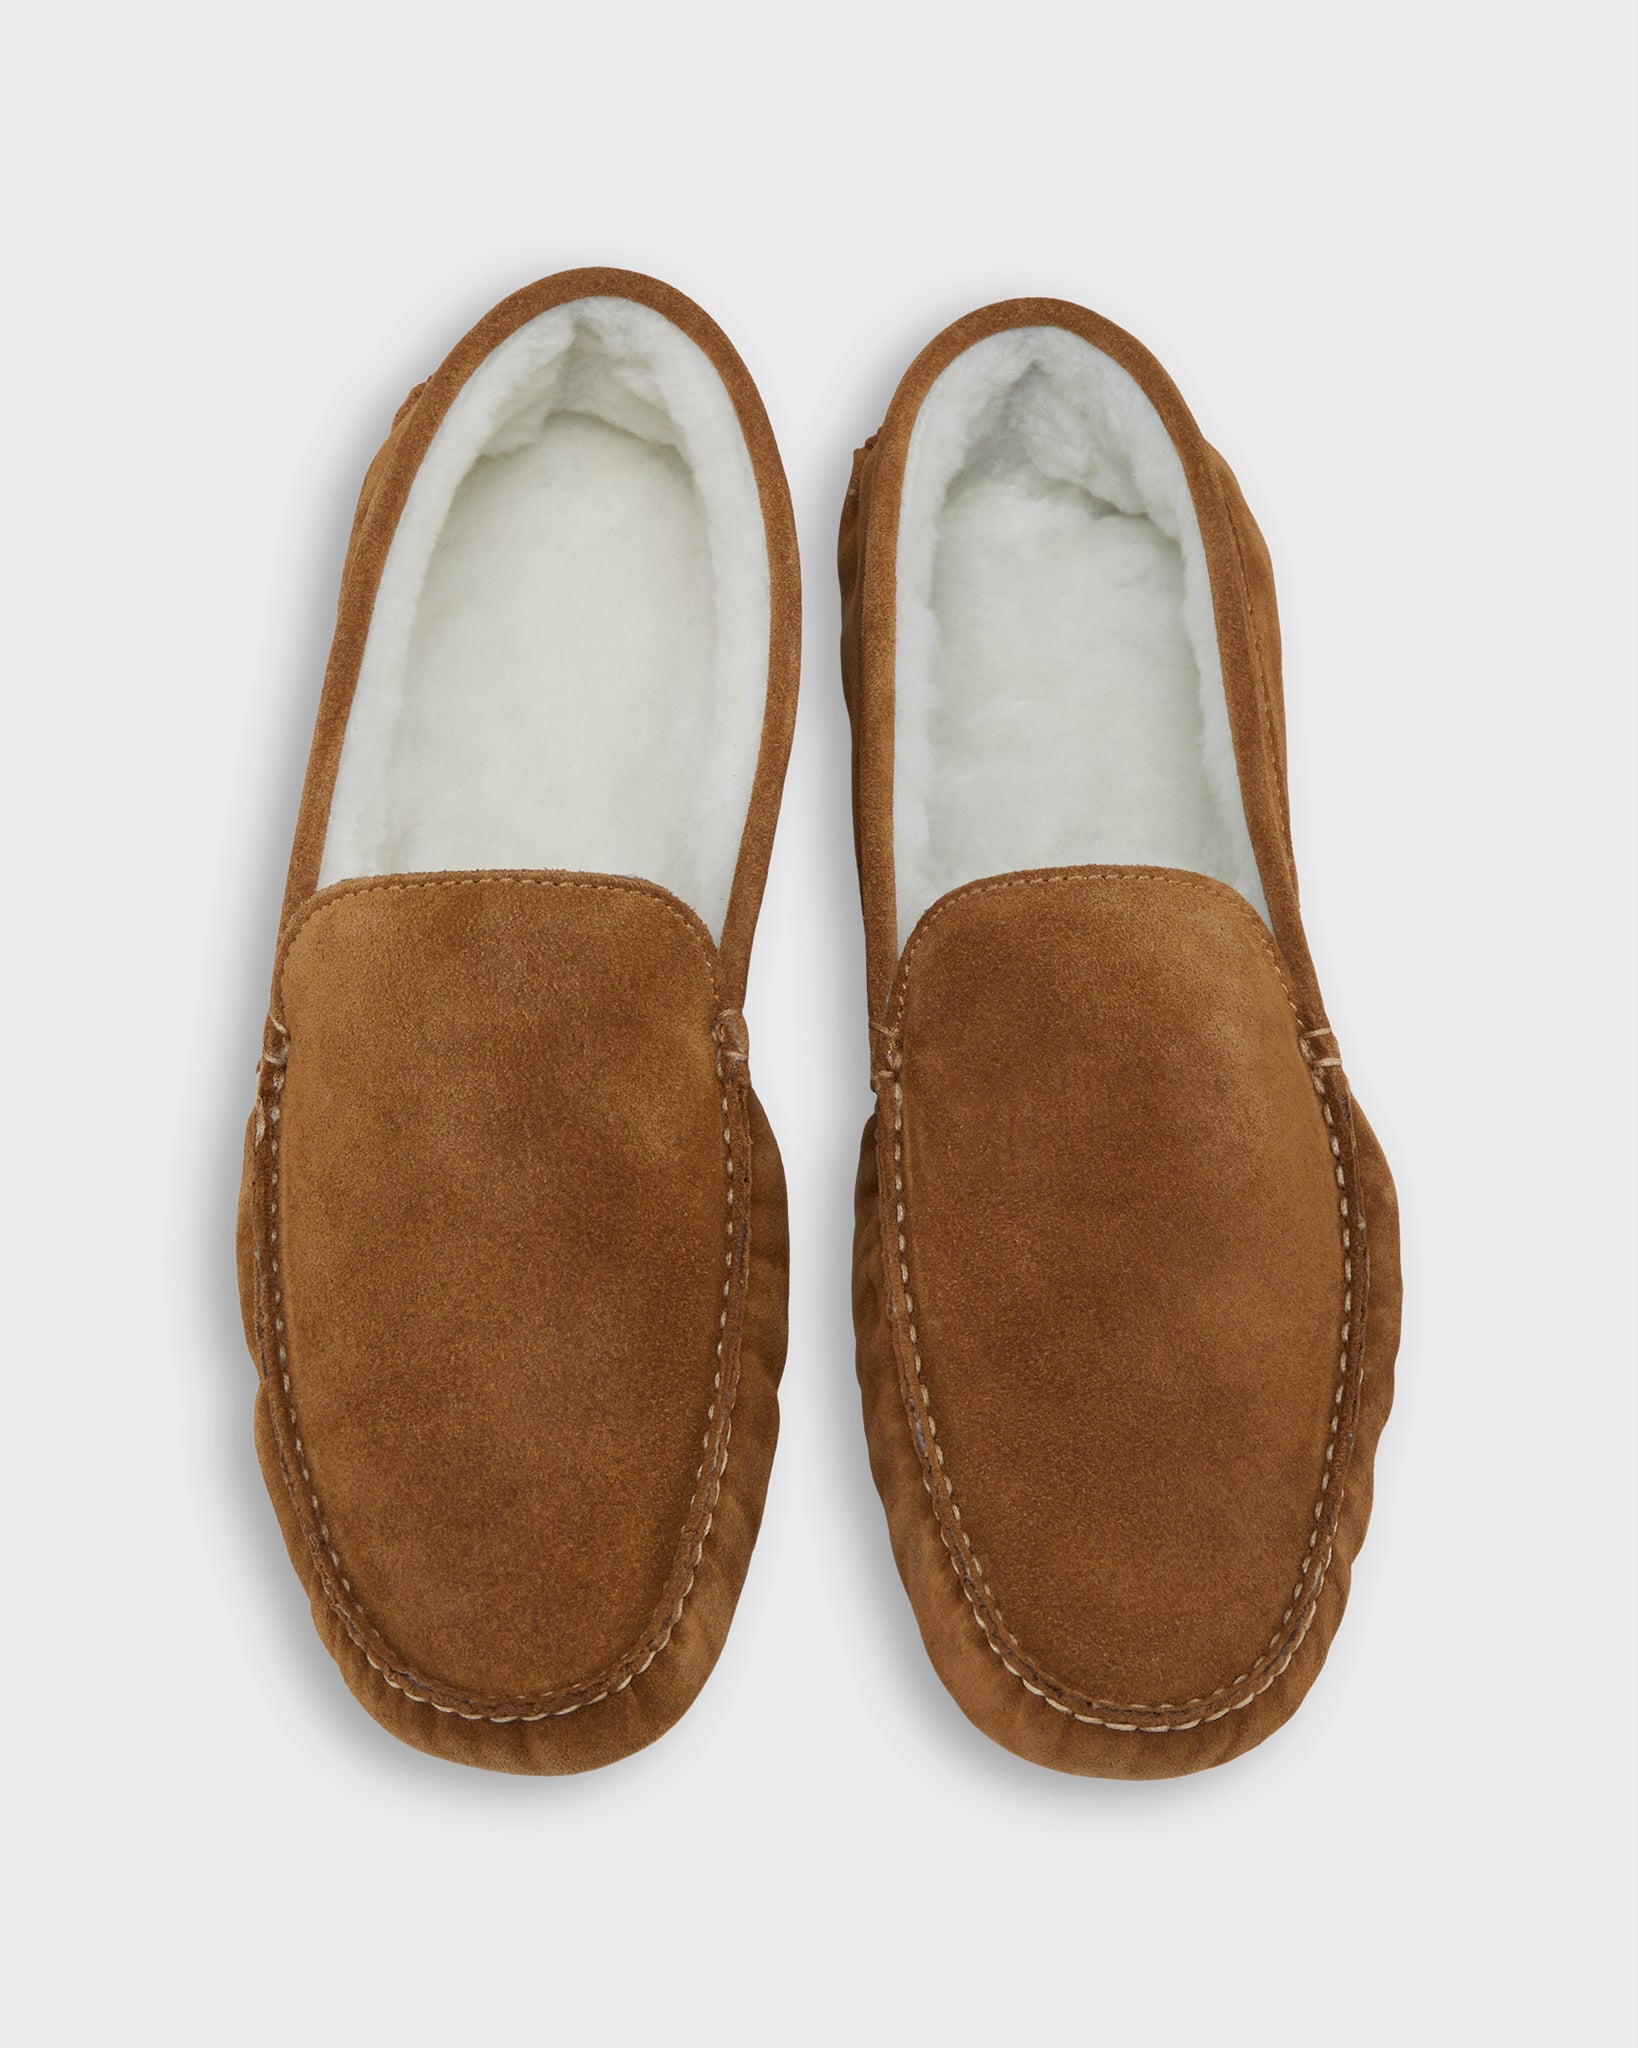 House Slippers in Sand Suede